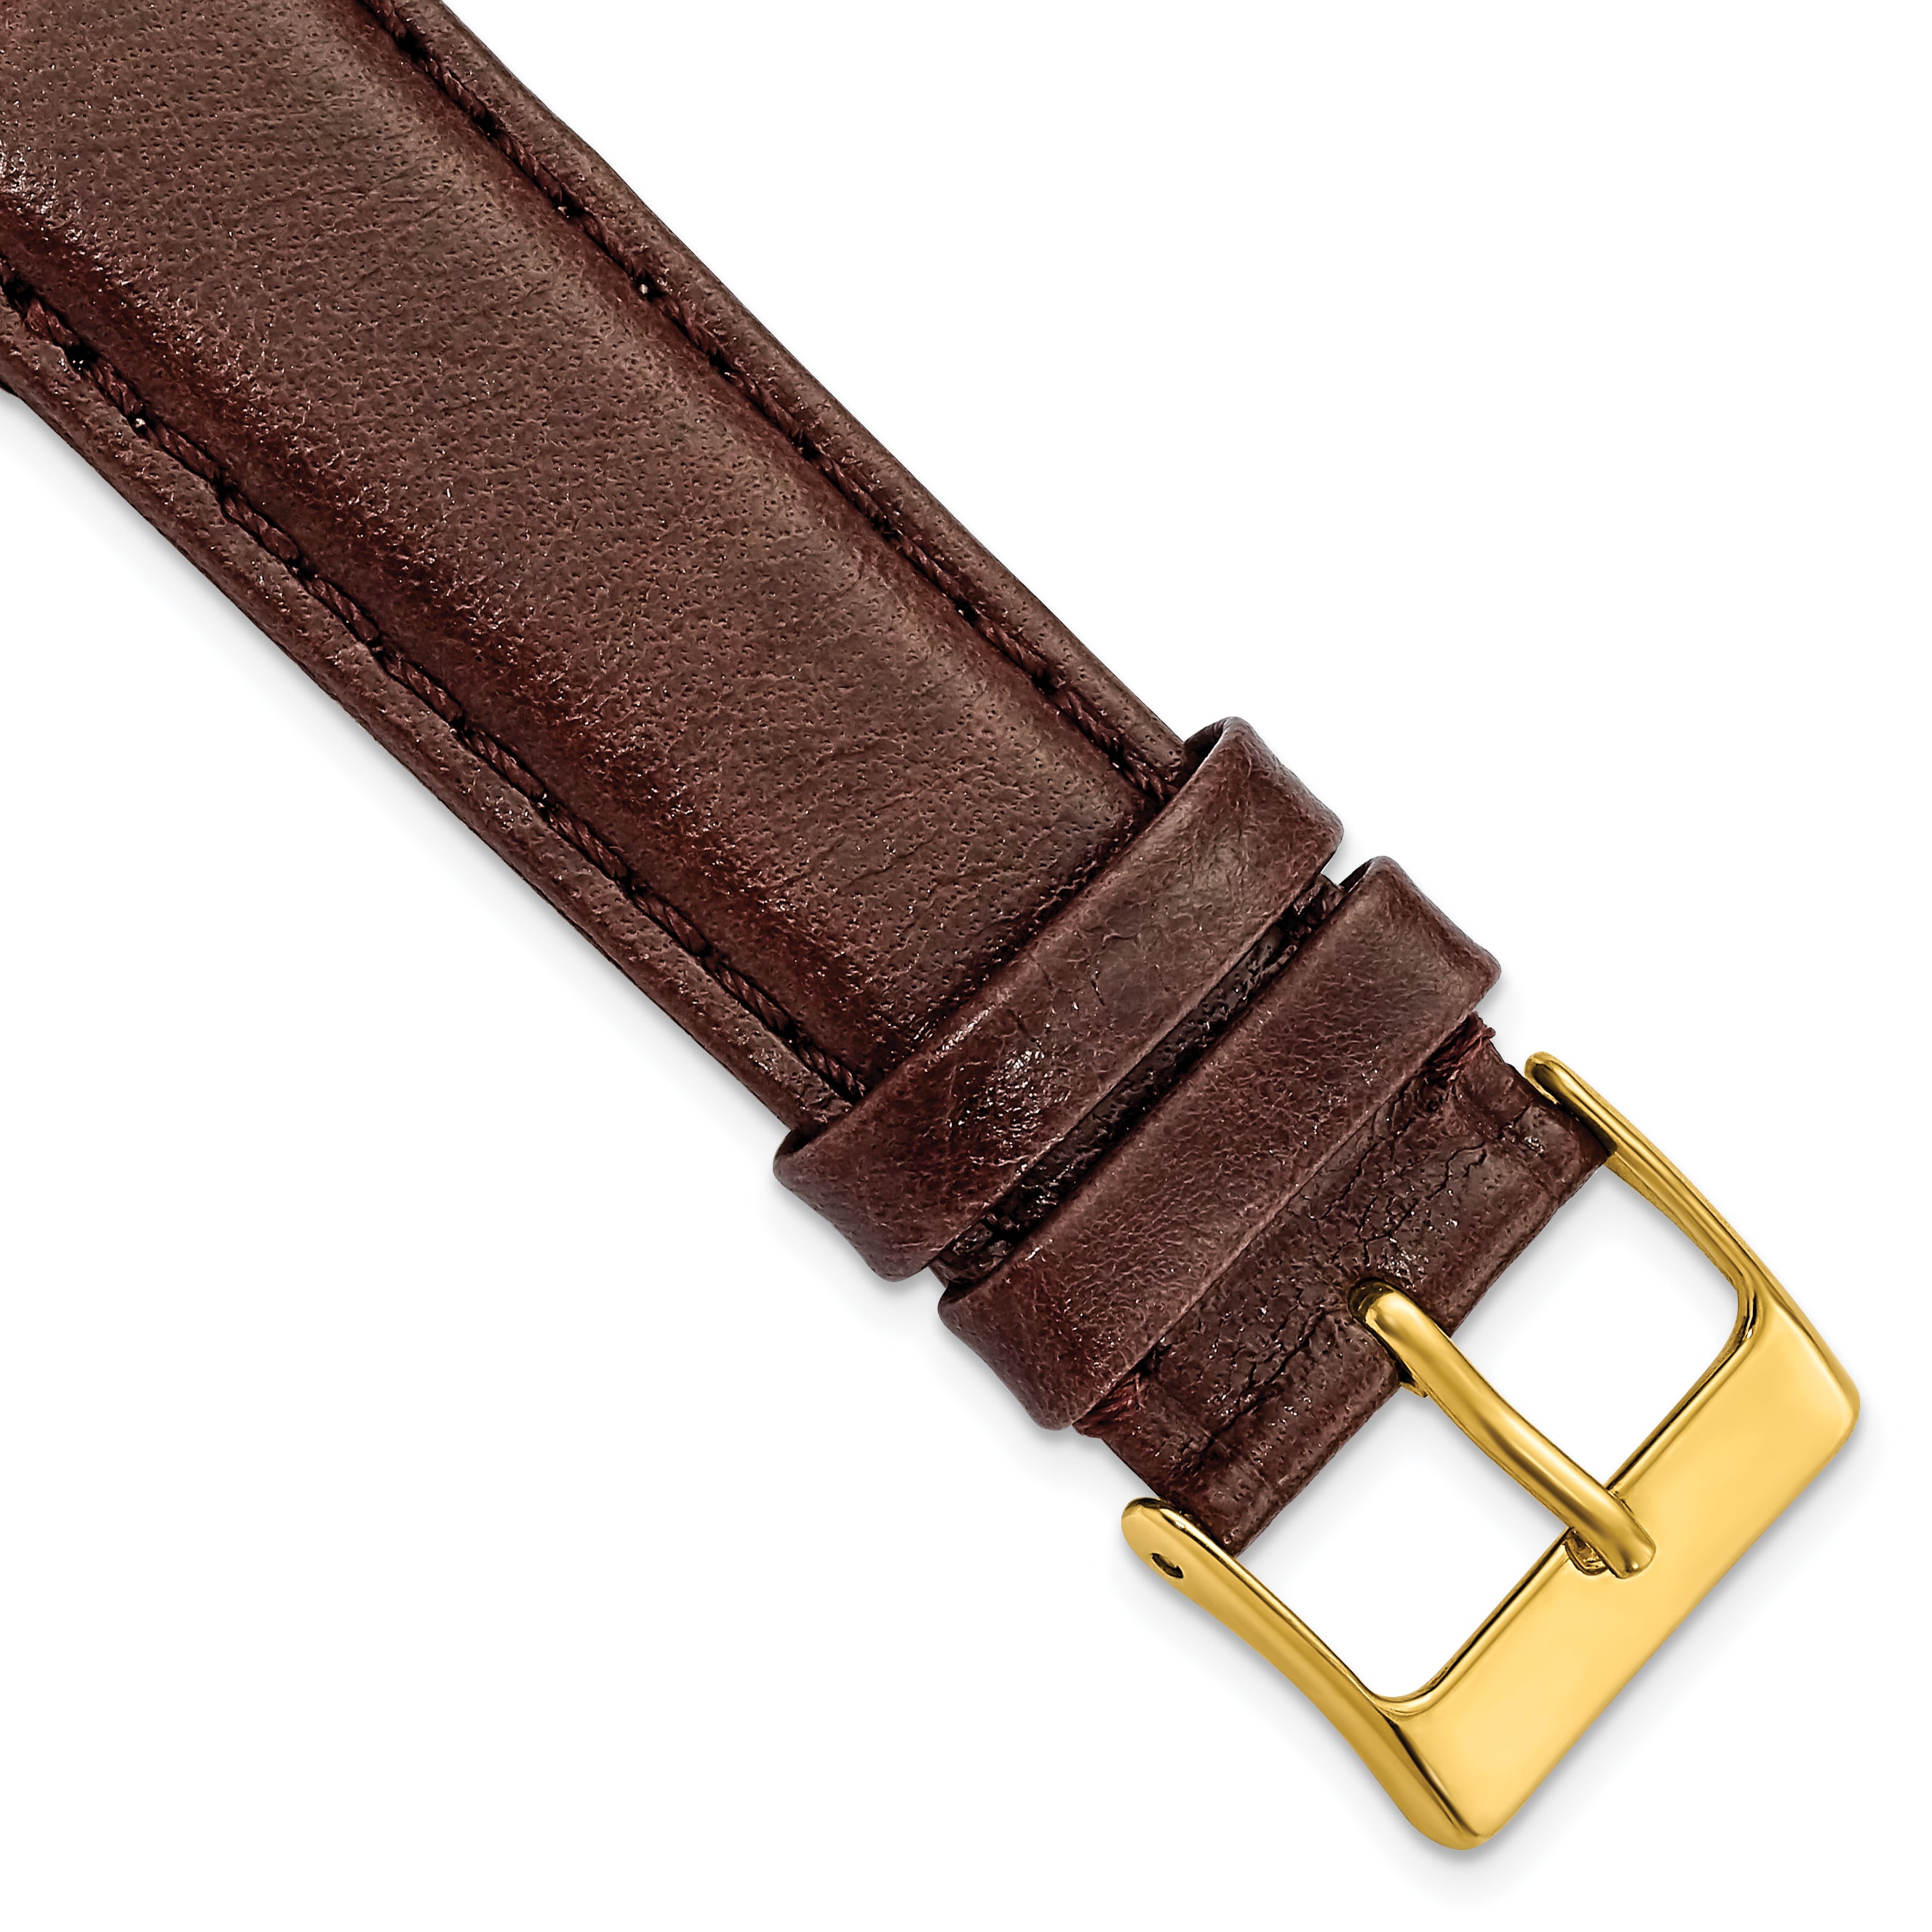 DeBeer 19mm Short Dark Brown Smooth Leather with Gold-tone Buckle 6.75 inch Watch Band